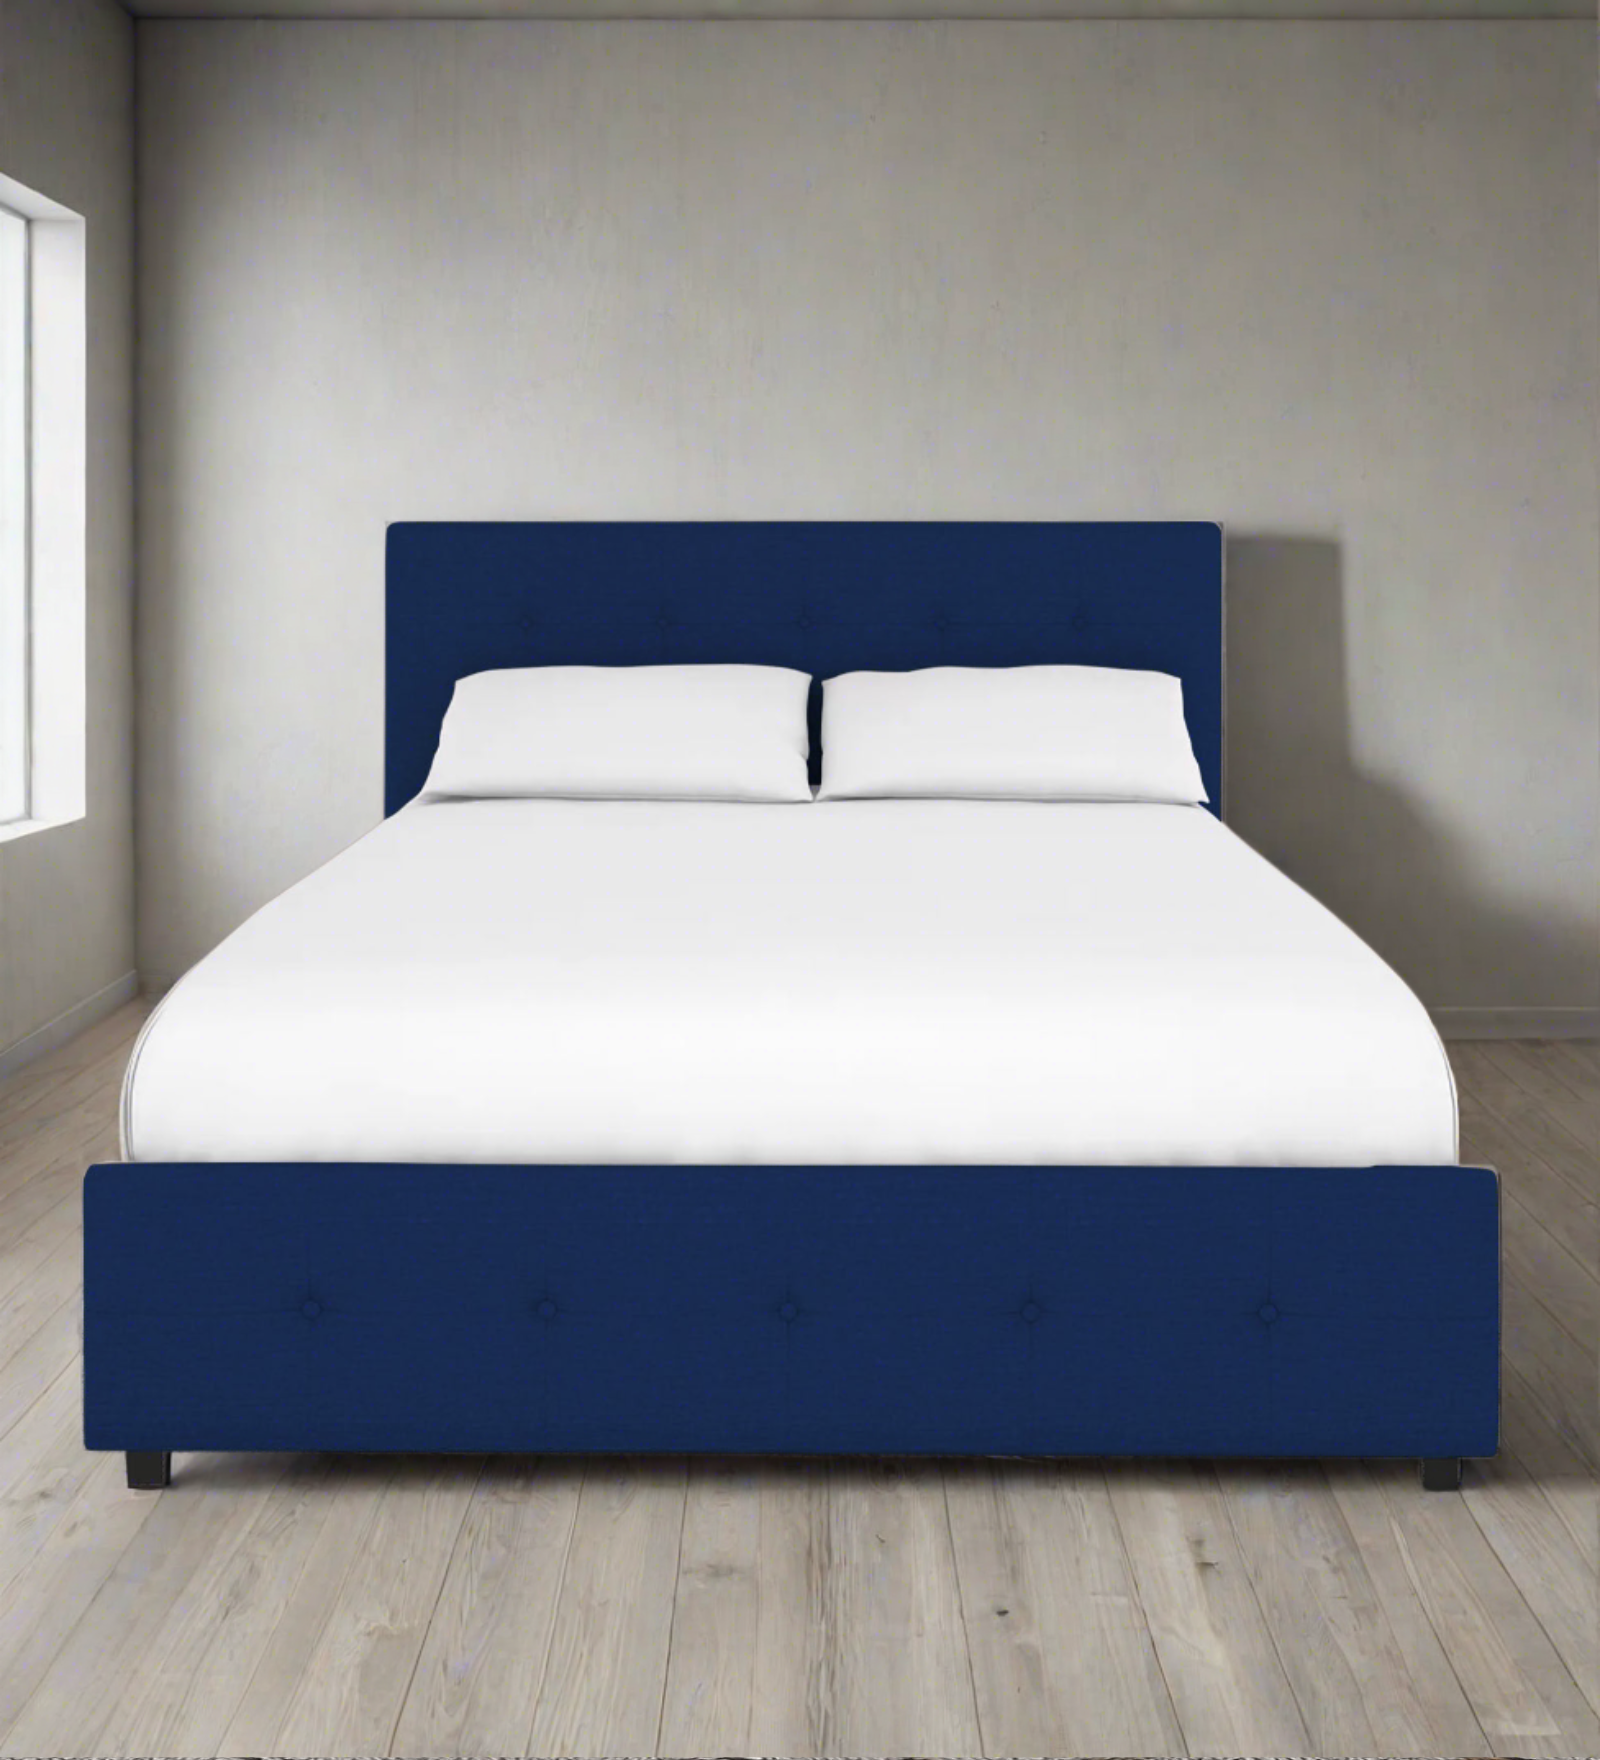 Lido Fabric King Size Bed In Royal Blue Colour With Storage